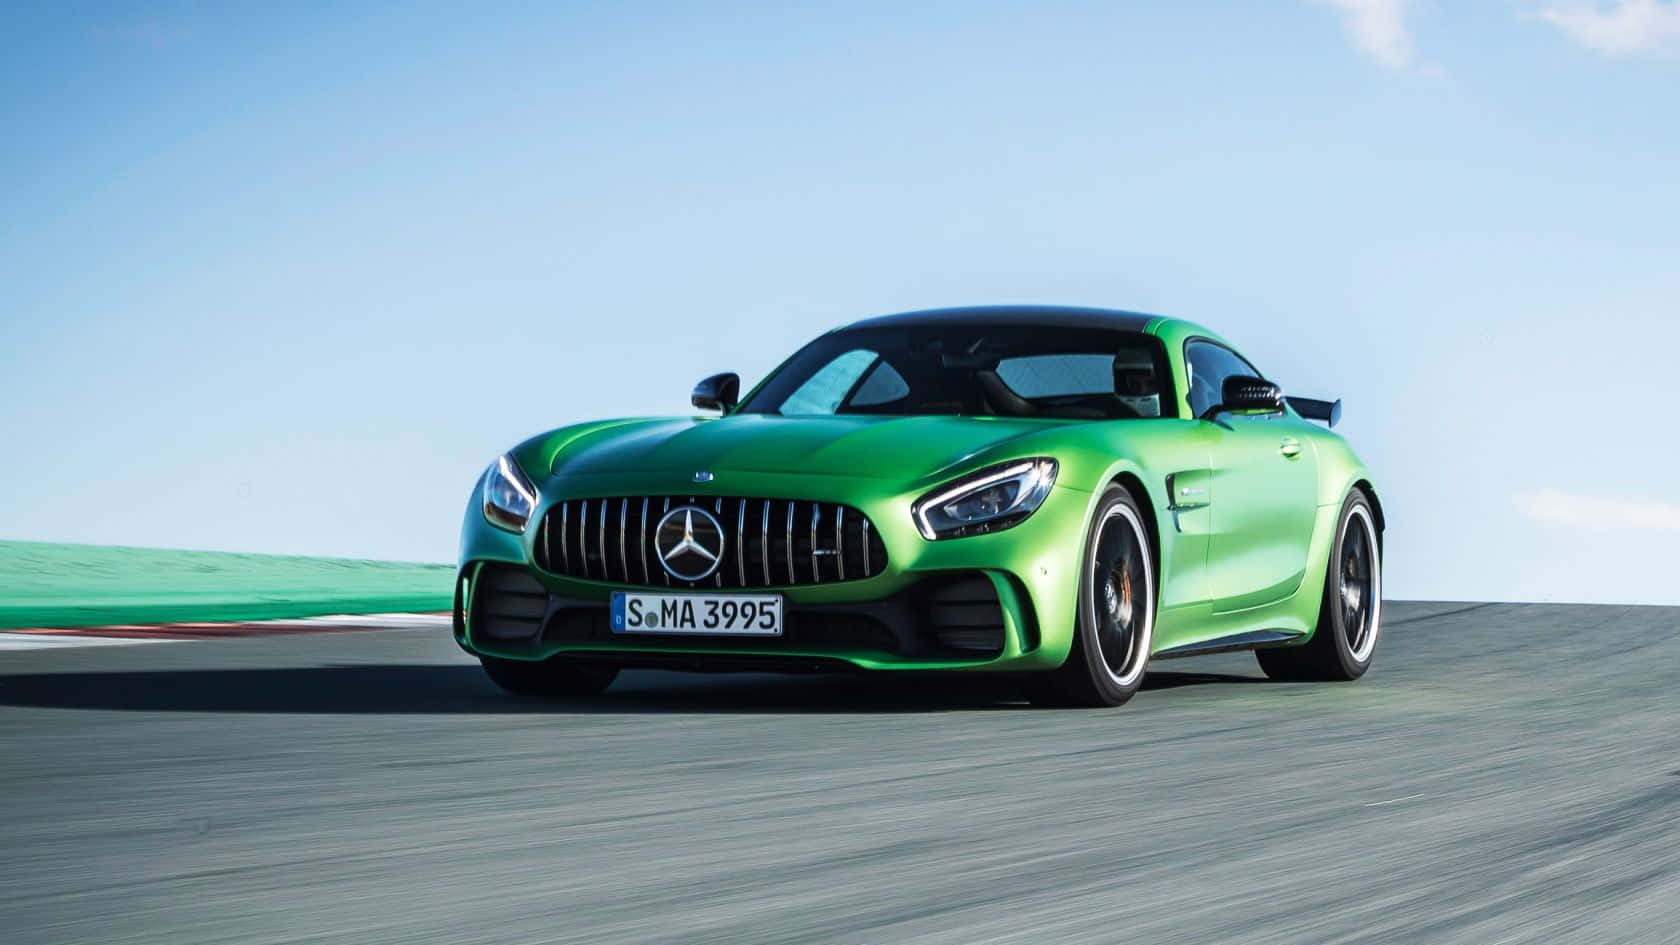 The Stylish AMG GT-R - One of the Best Performance Cars Out There